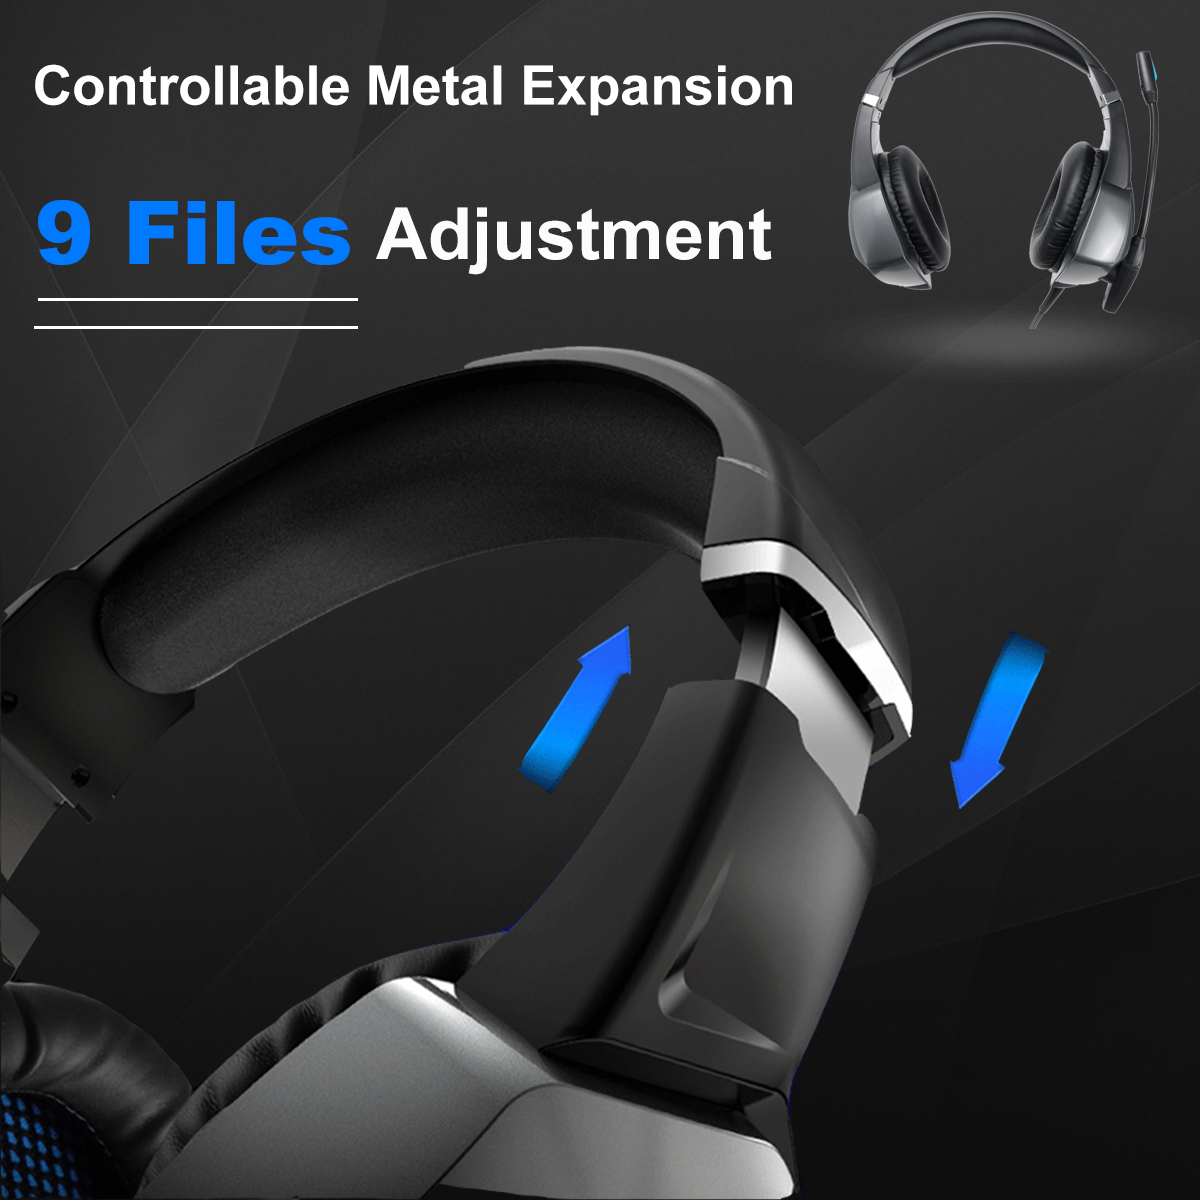 Bakeey A6 7.1 Surrounding Hifi Sound Gaming Headset LED Headphones with Microphone for Computer Phones